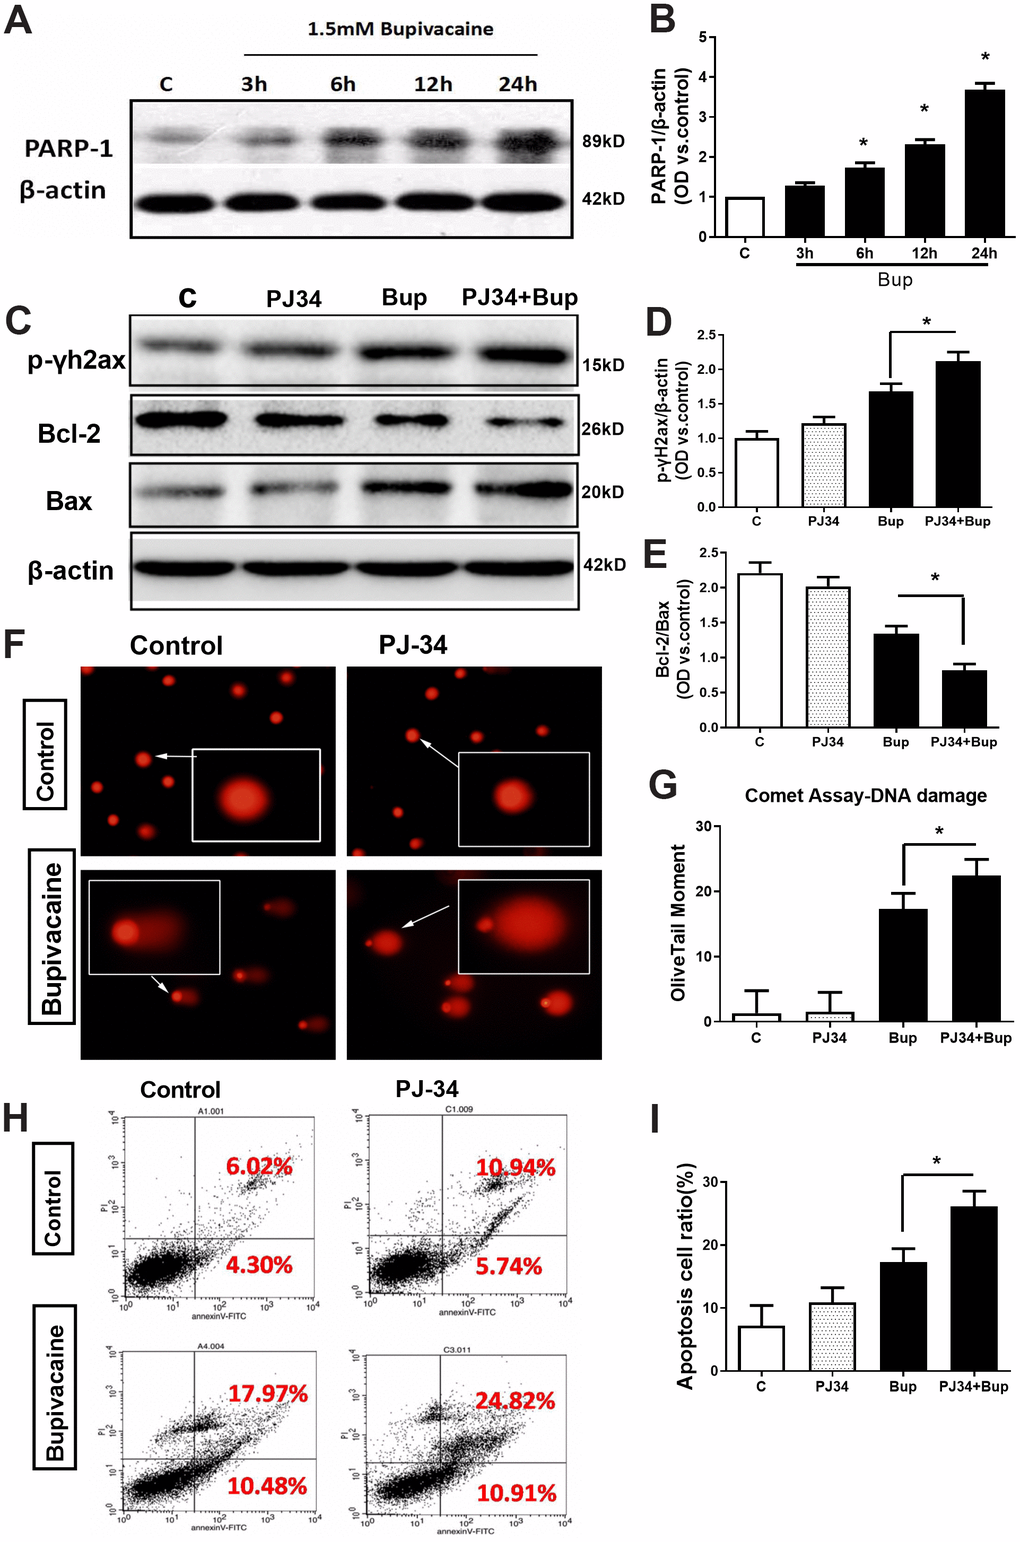 The key DNA repair protein PARP-1 closely participated in the repair of oxidative DNA damage in neurons caused by bupivacaine. In in vitro, the expressions of key repair protein PARP-1 in the BER pathway were significantly increased following bupivacaine-induced neuronal oxidative DNA damage. And, inhibition of PARP-1 expression with PJ34(a specific inhibitor of PARP) significantly aggravated the bupivacaine neurotoxicity. After SH-SY5Y cells were exposed to 1.5mM bupivacaine, the protein expression of PARP-1 (A, B) was increased obviously in a time-dependent manner. In the meantime, the DNA damage was aggravated: The DNA damage marker - phosphorylation level of γ-H2AX was significantly increased (C, D), while the comet assay indicator -the olive tail moment was significantly increased (F, G) in the Bupivacaine group as compared to Control group, which was concomitant with a significant reduction of the ratio of Bcl-2/Bax proteins (C, E) and increases of apoptosis as assessed by flow cytometry (H, I). Data are the mean ± SD of three independent experiments performed in triplicate, (*P 